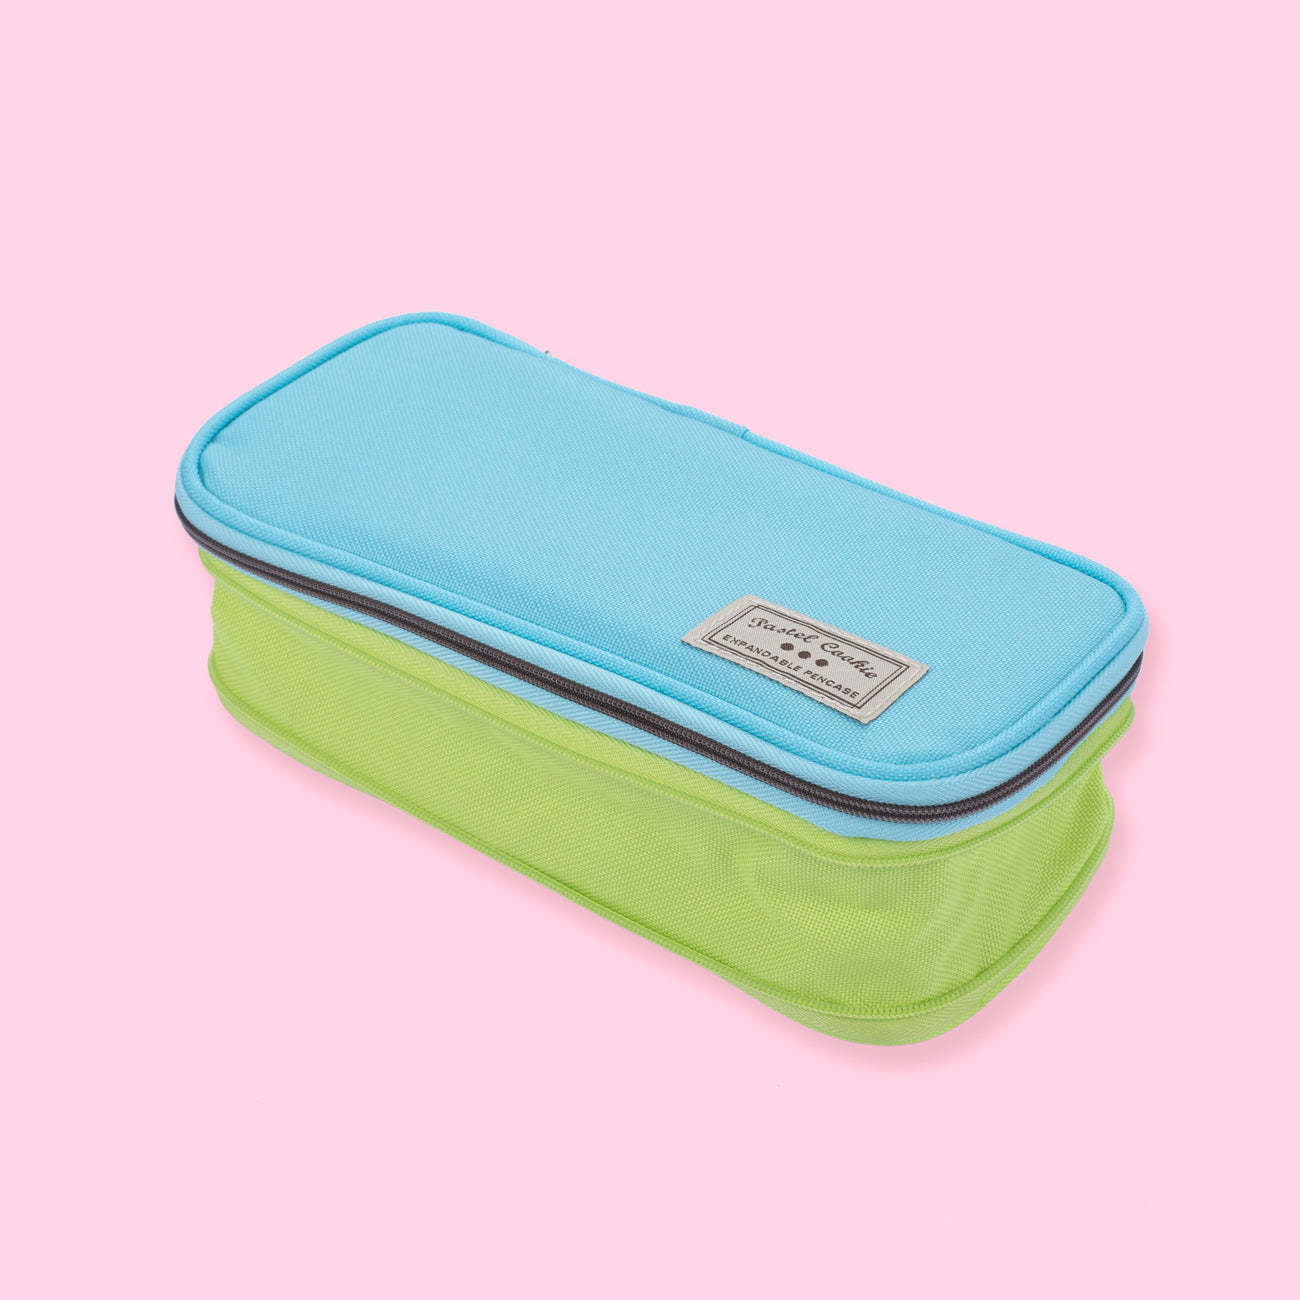 Stationery Pal Multi-functional Pastel Pencil Case - Blue